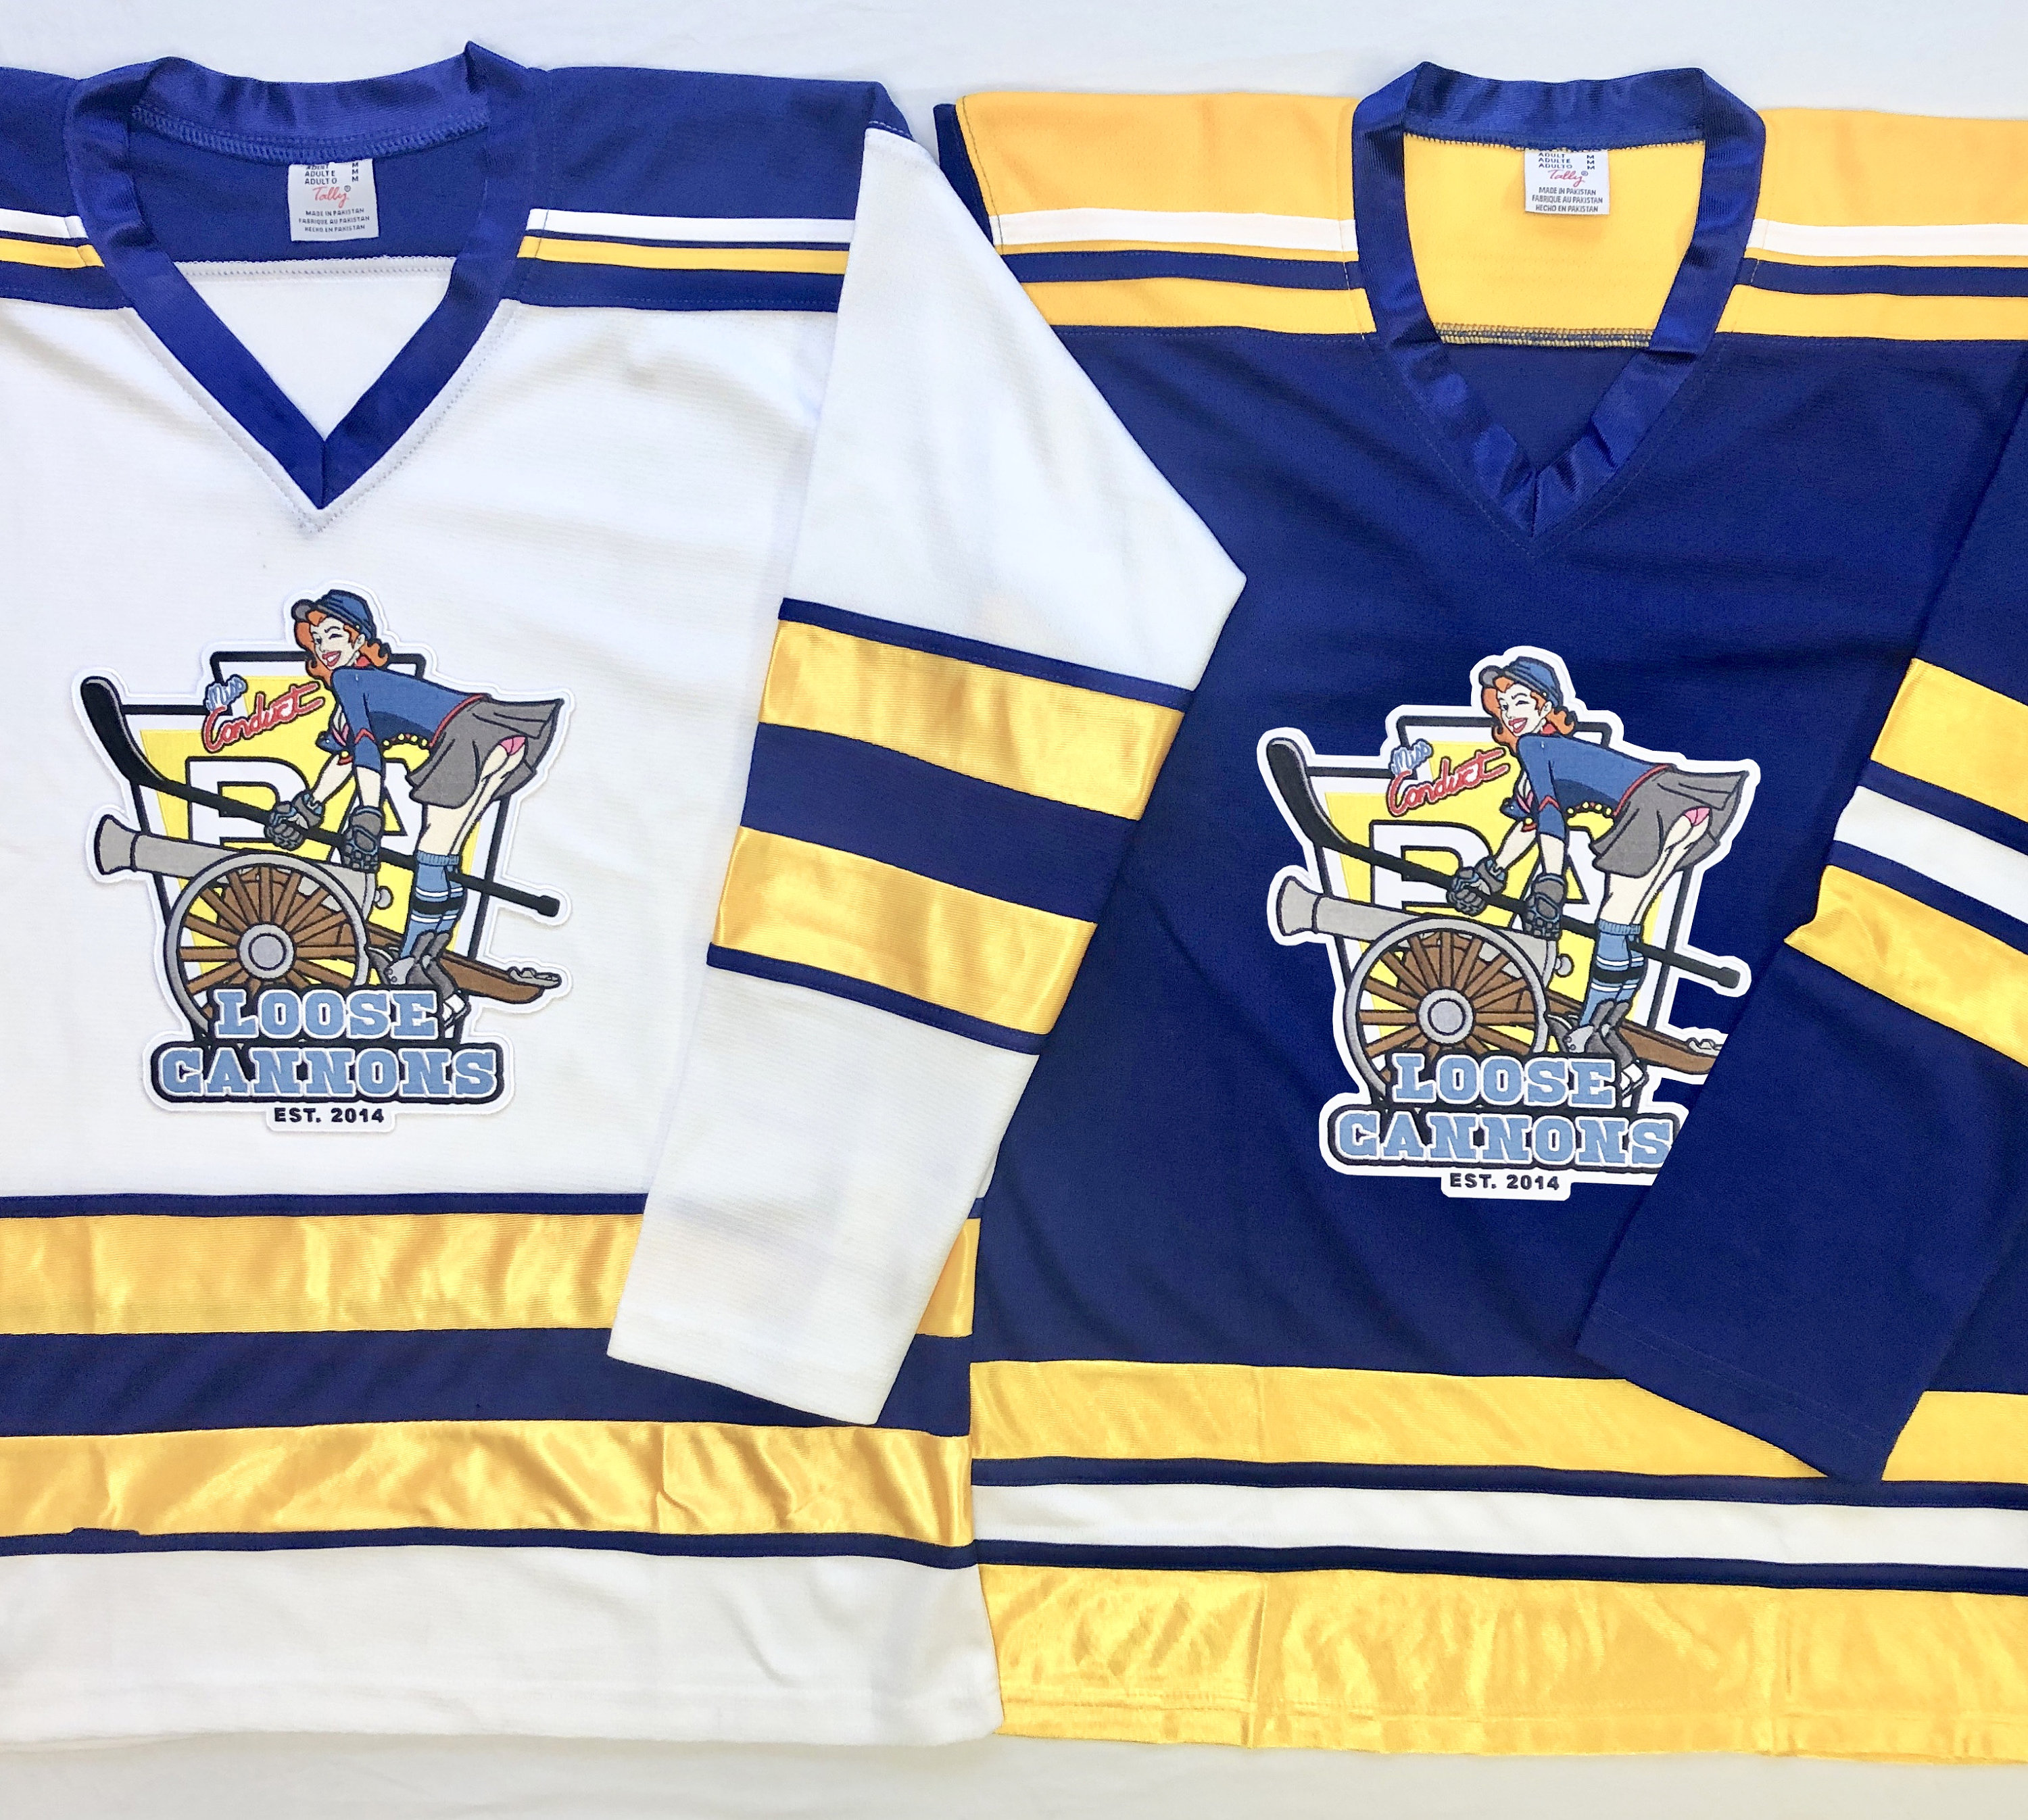  Vipers Hockey Jerseys - We are Ready to Customize with